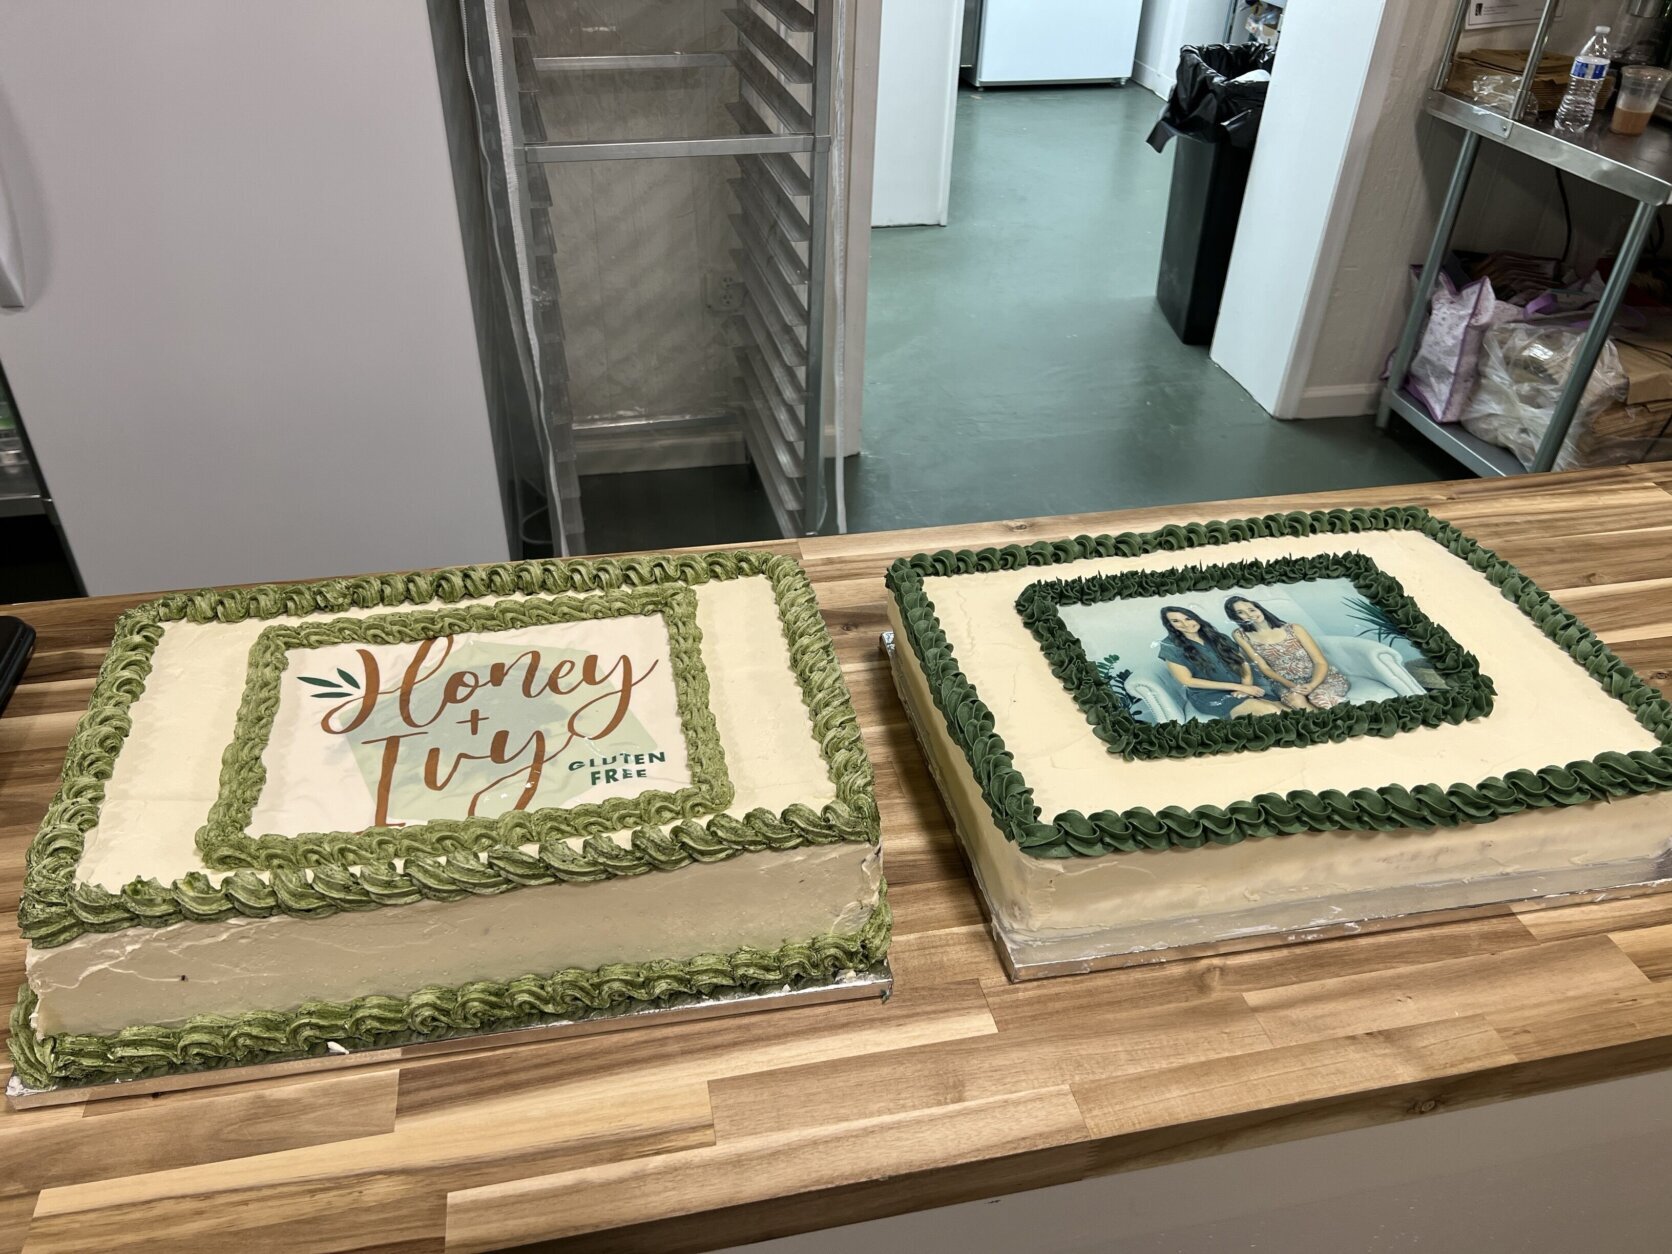 two cakes, one says "Honey and Ivy" and he other has a photo of the owners printed on top